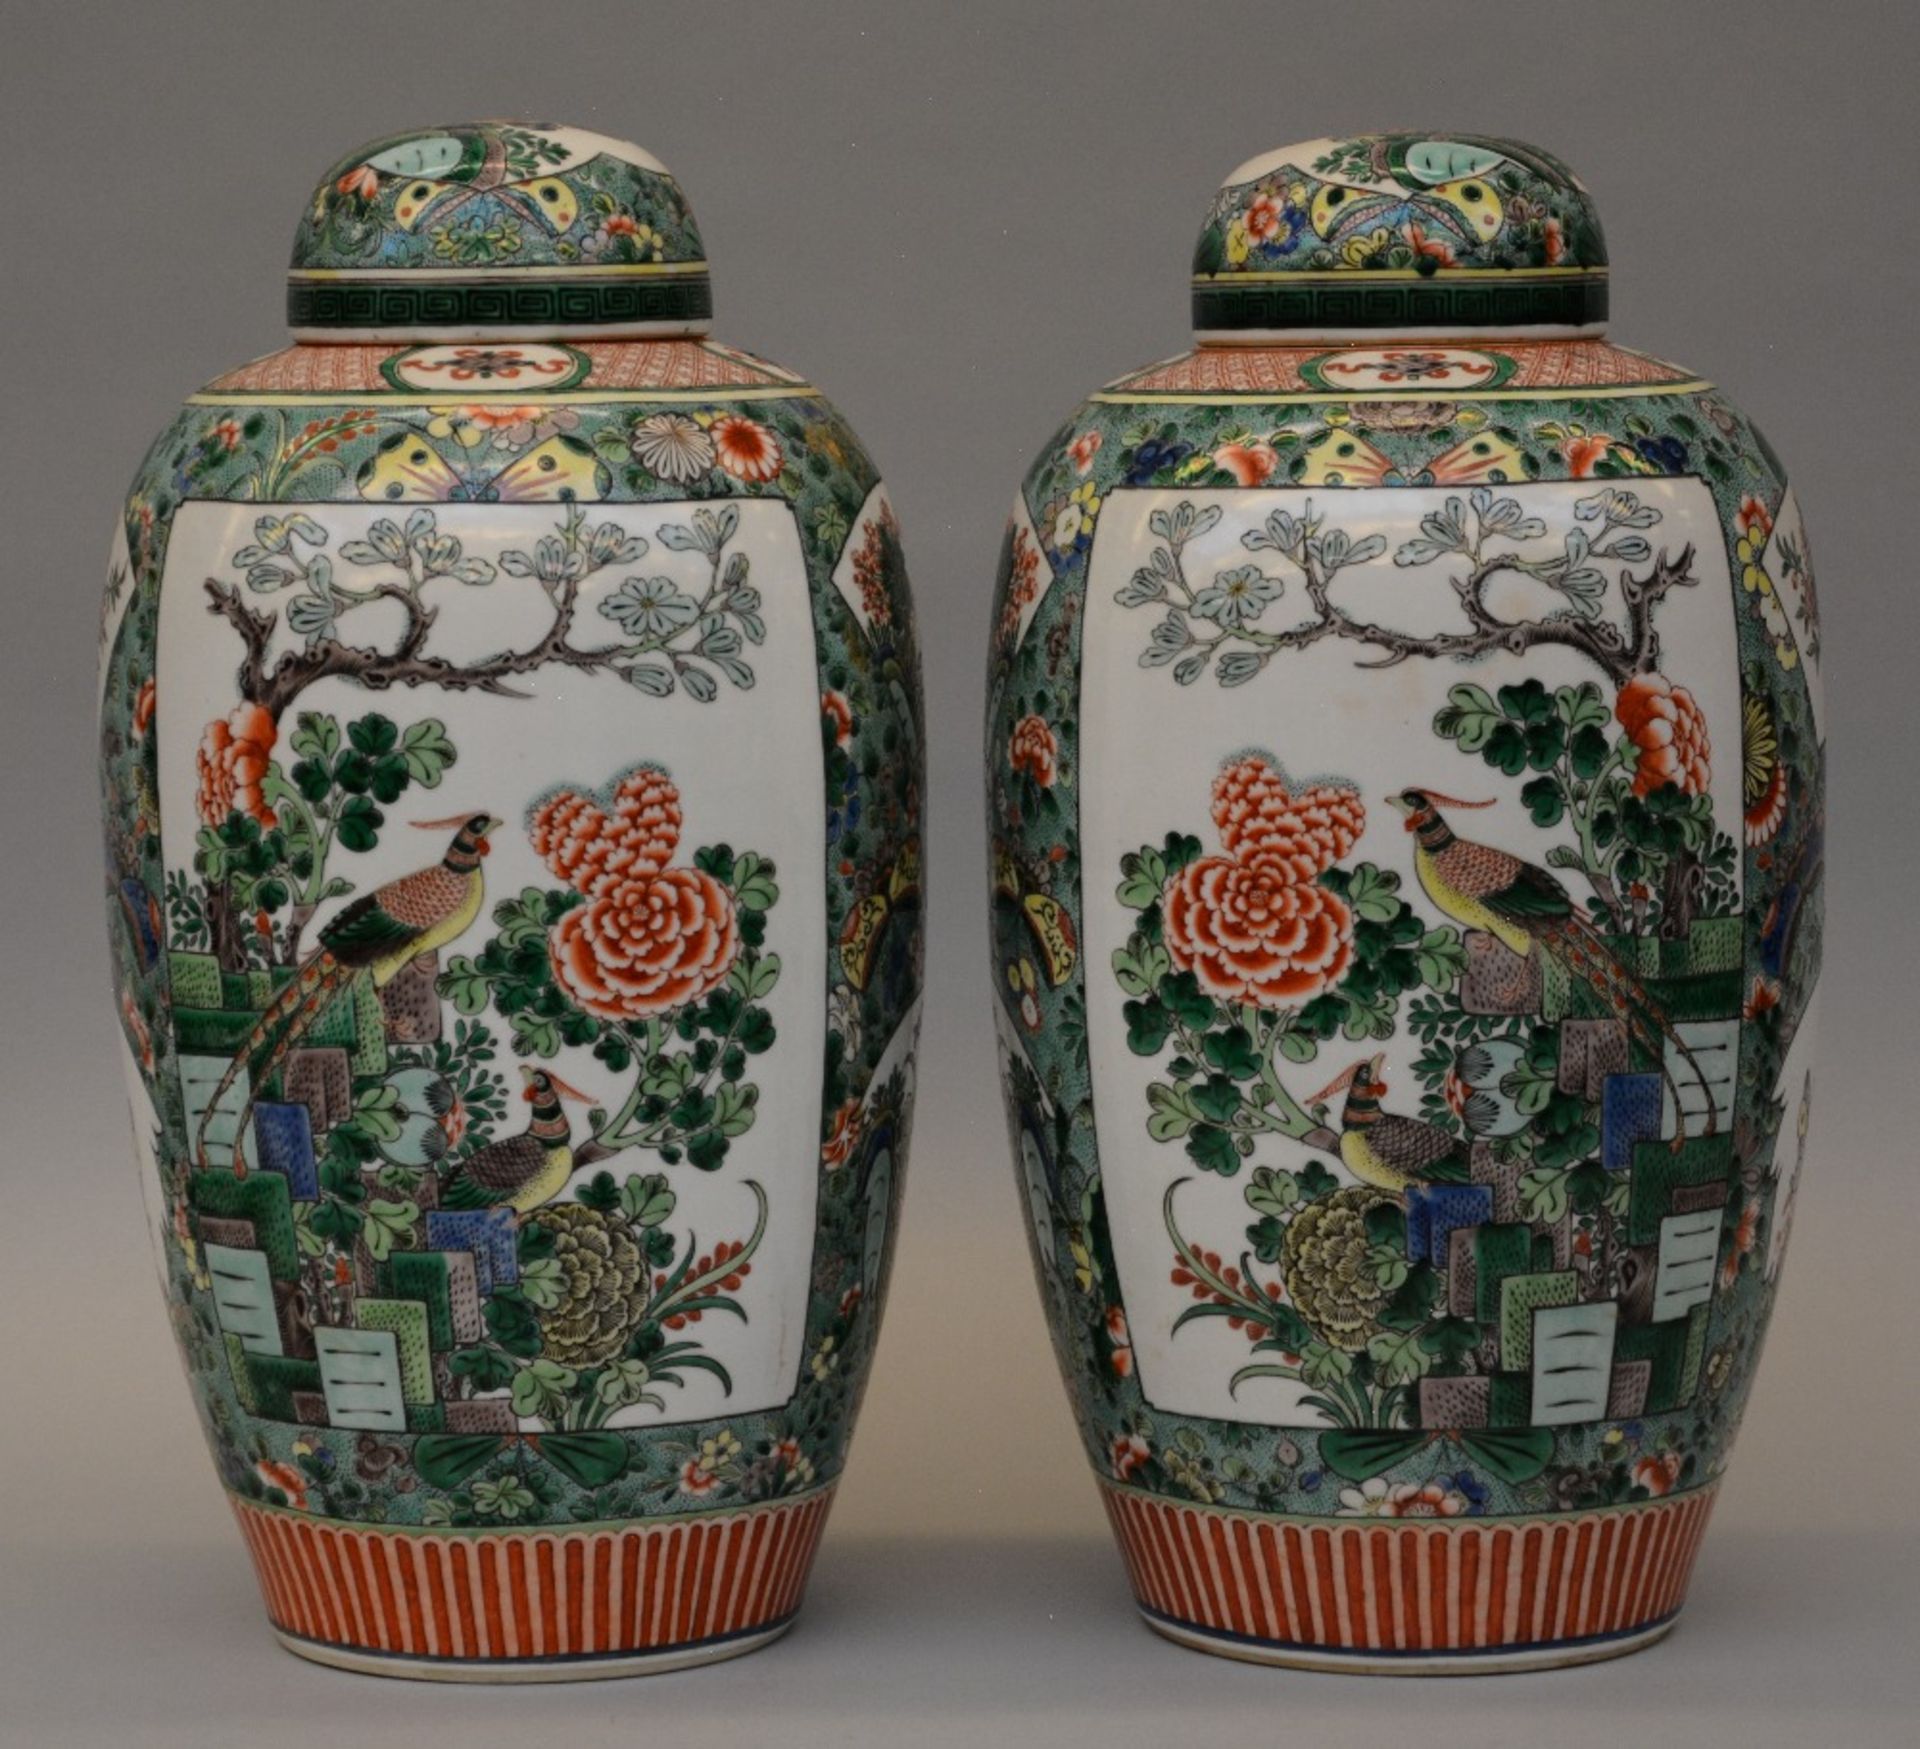 A pair of Chinese famille verte pots with cover, painted with floral motifs, birds and a